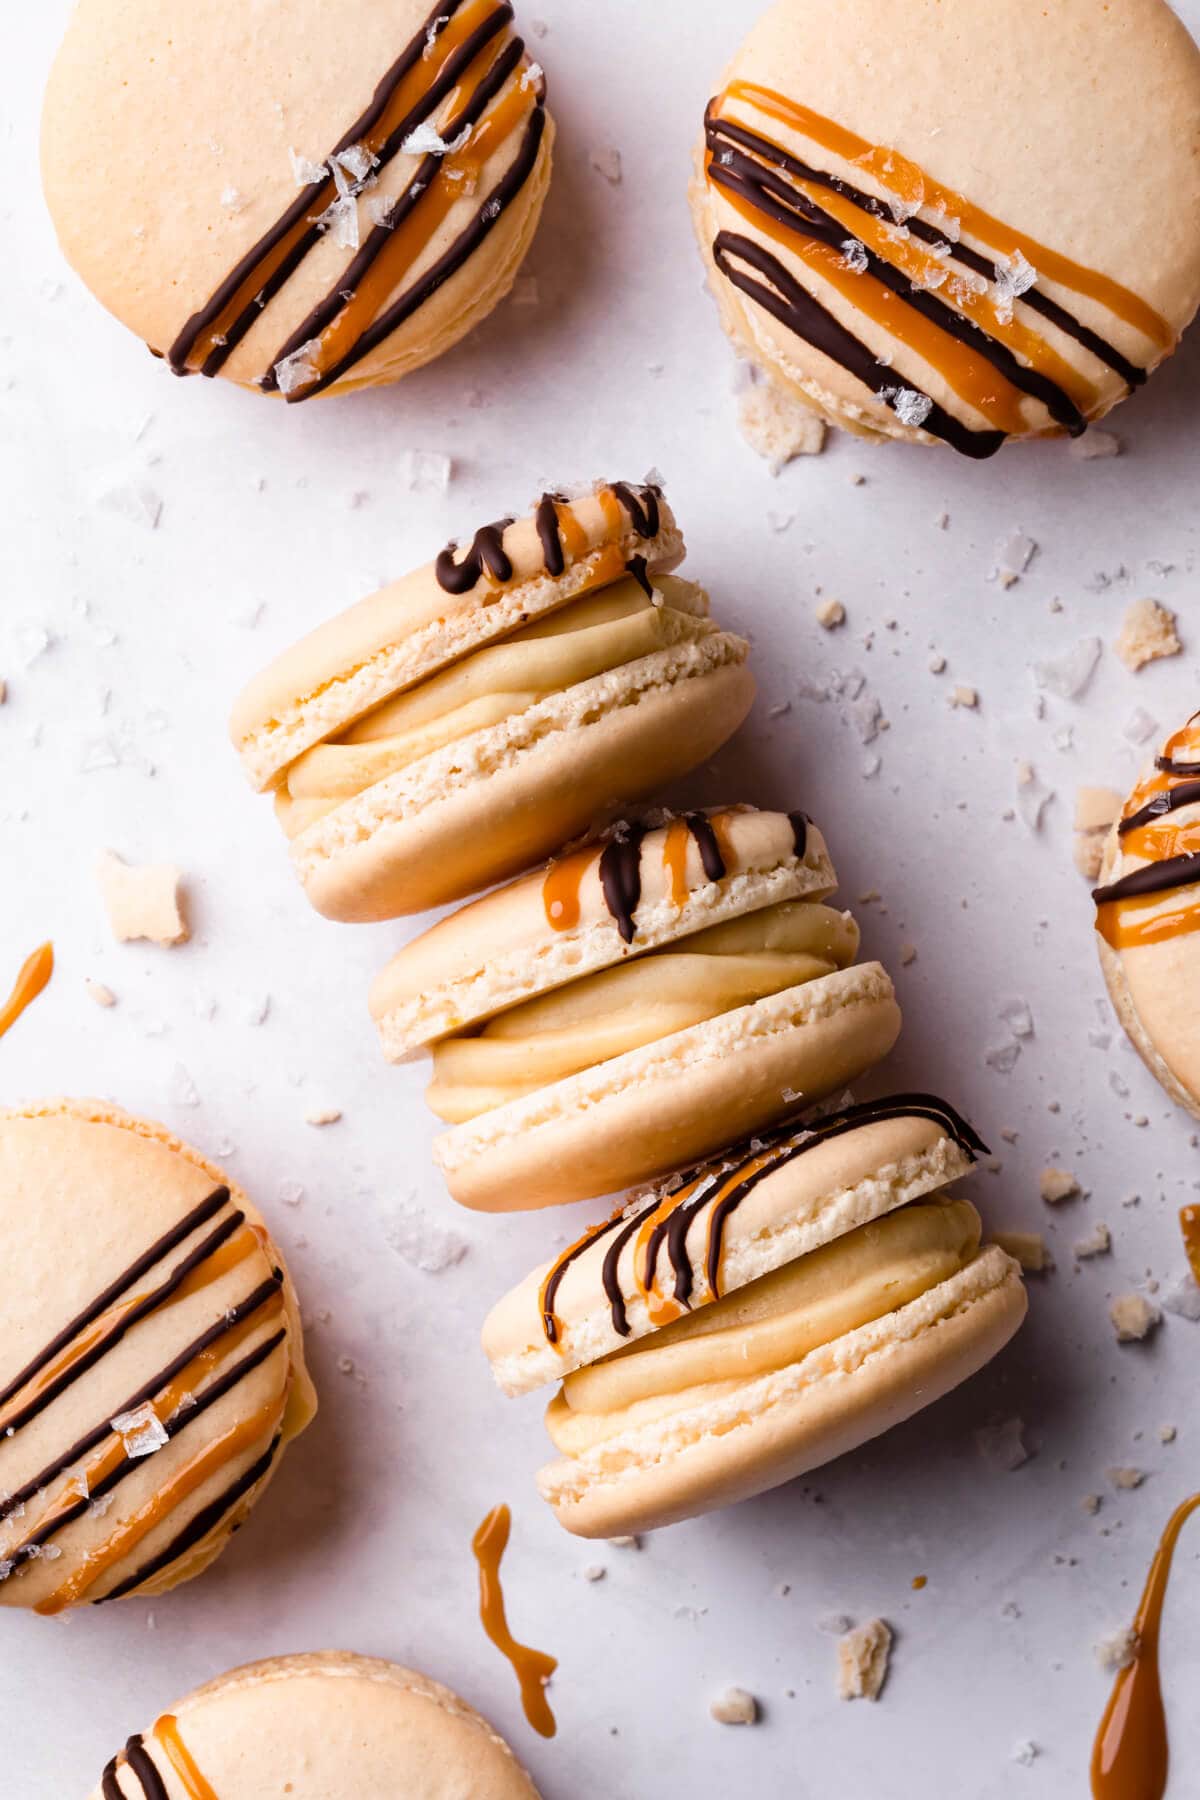 salted caramel macarons with crumbs and sea salt flakes around them.